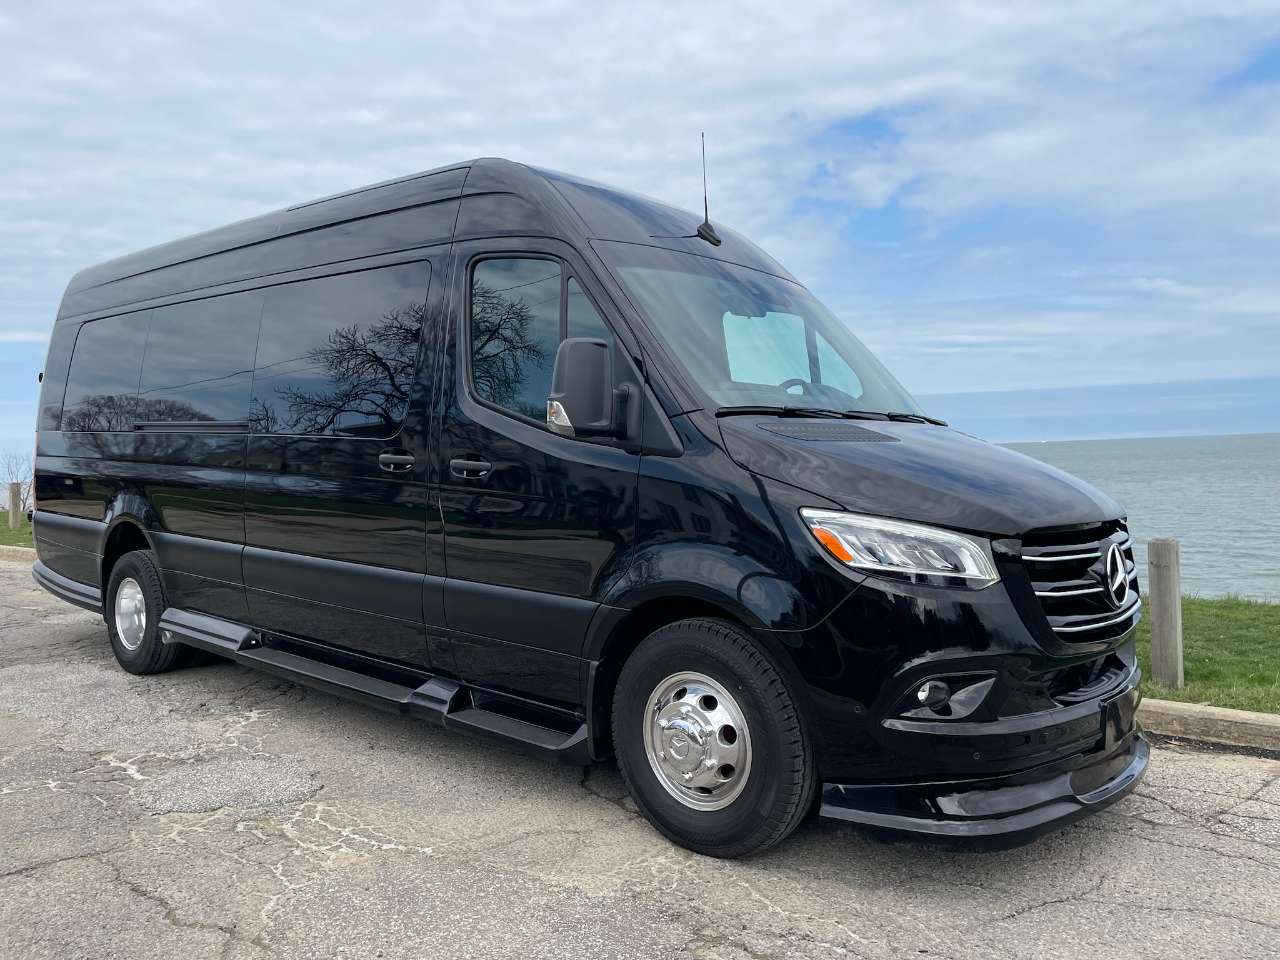 Luxury Sprinter Sales by American Coach Sales - Professional Series Limo